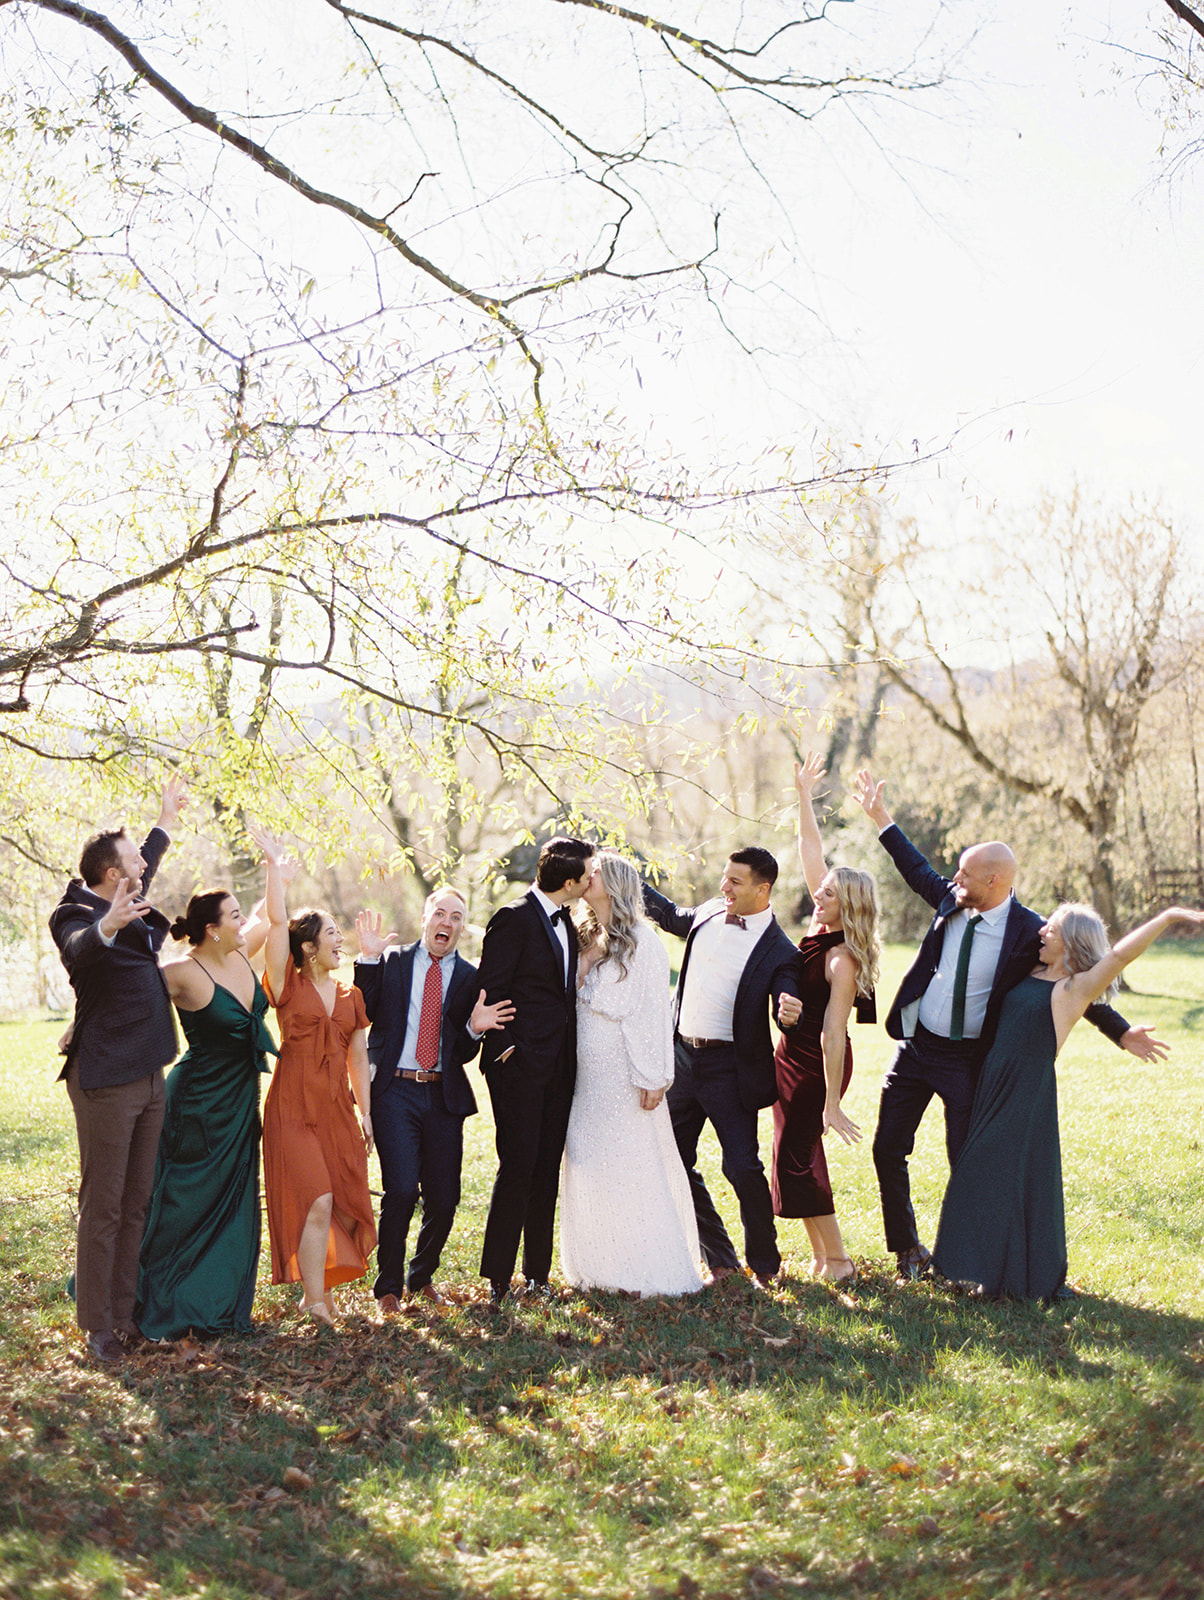 bride and groom kiss groomsmen and bridesmaids pictures post ceremony pictures elegant wedding pictures